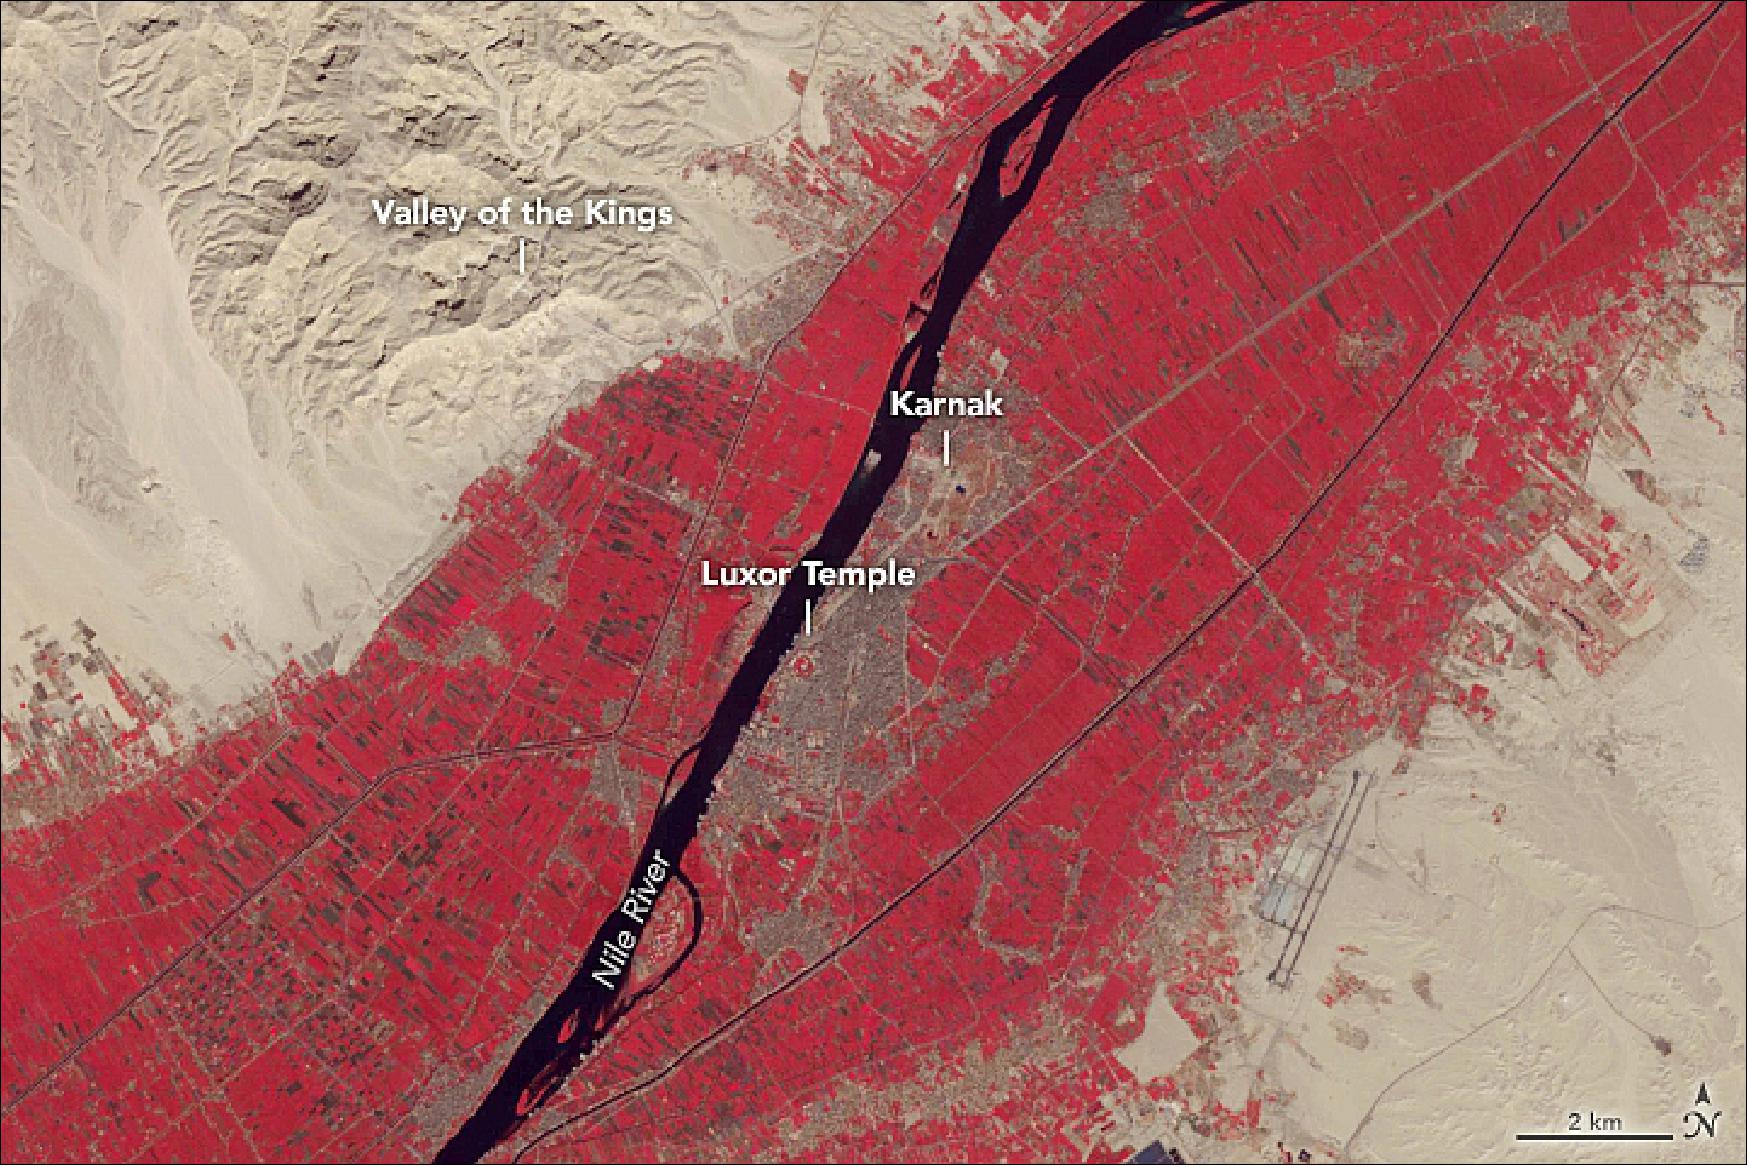 Figure 34: This image of Luxor and its surroundings was acquired on 15 November 2018, by the ASTER (Advanced Spaceborne Thermal Emission and Reflection Radiometer) instrument on NASA’s Terra satellite. This false-color scene is shown in green, red, and near-infrared light, a combination that helps differentiate components of the landscape. Water is black, vegetation is red, and urban areas are brown to gray (image credit: NASA Earth Observatory, image by Lauren Dauphin, using data from NASA/METI/AIST/Japan Space Systems, and U.S./Japan ASTER Science Team. Story by Kasha Patel)